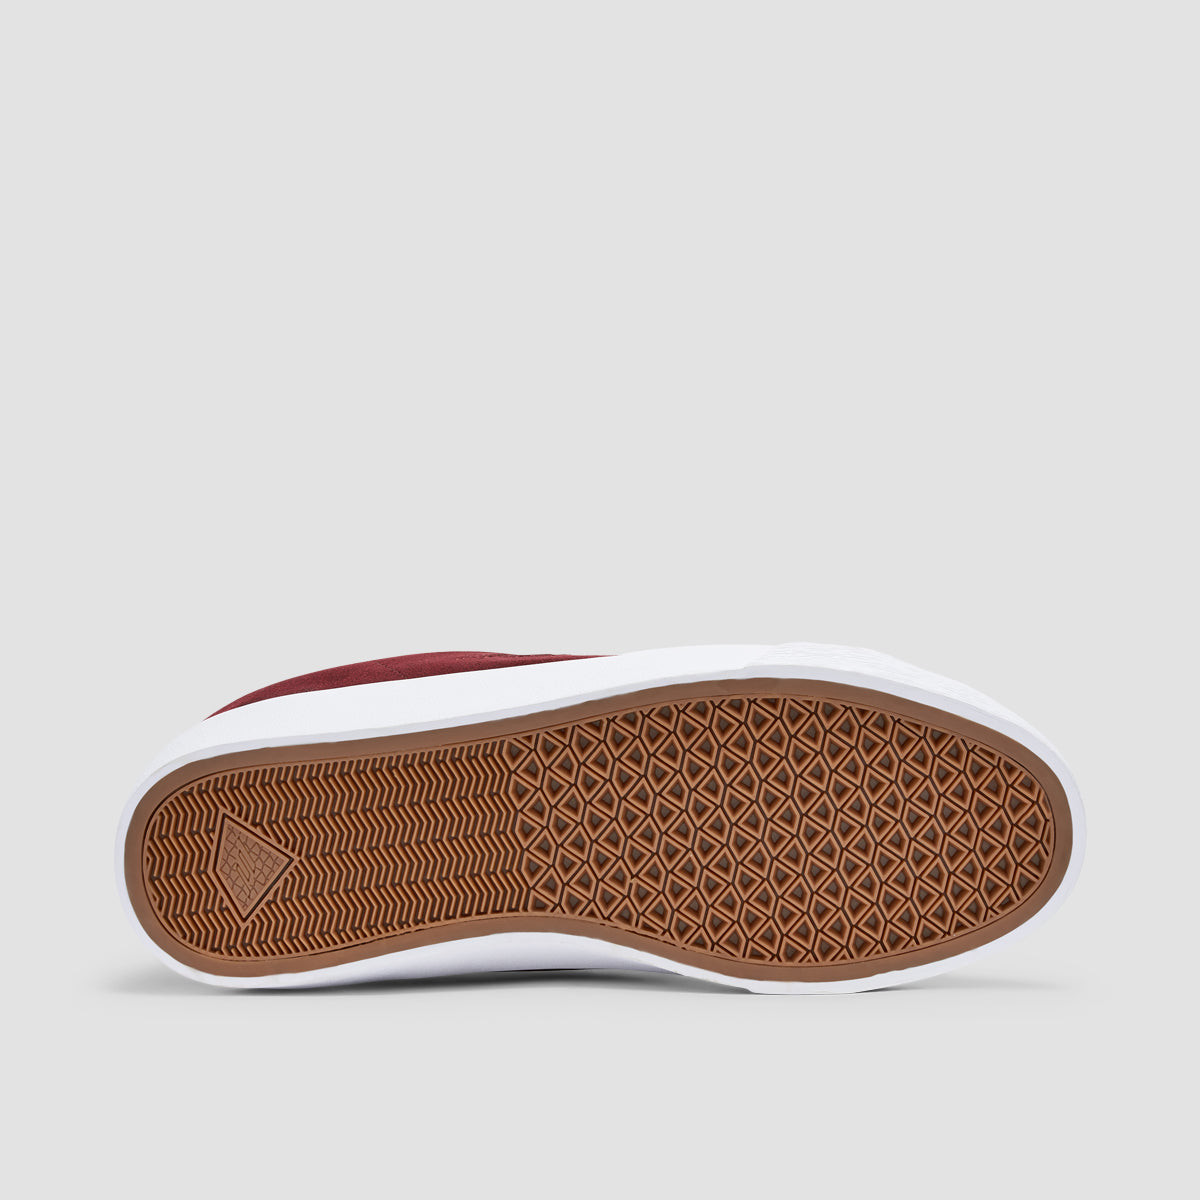 Emerica Temple Shoes Burgundy